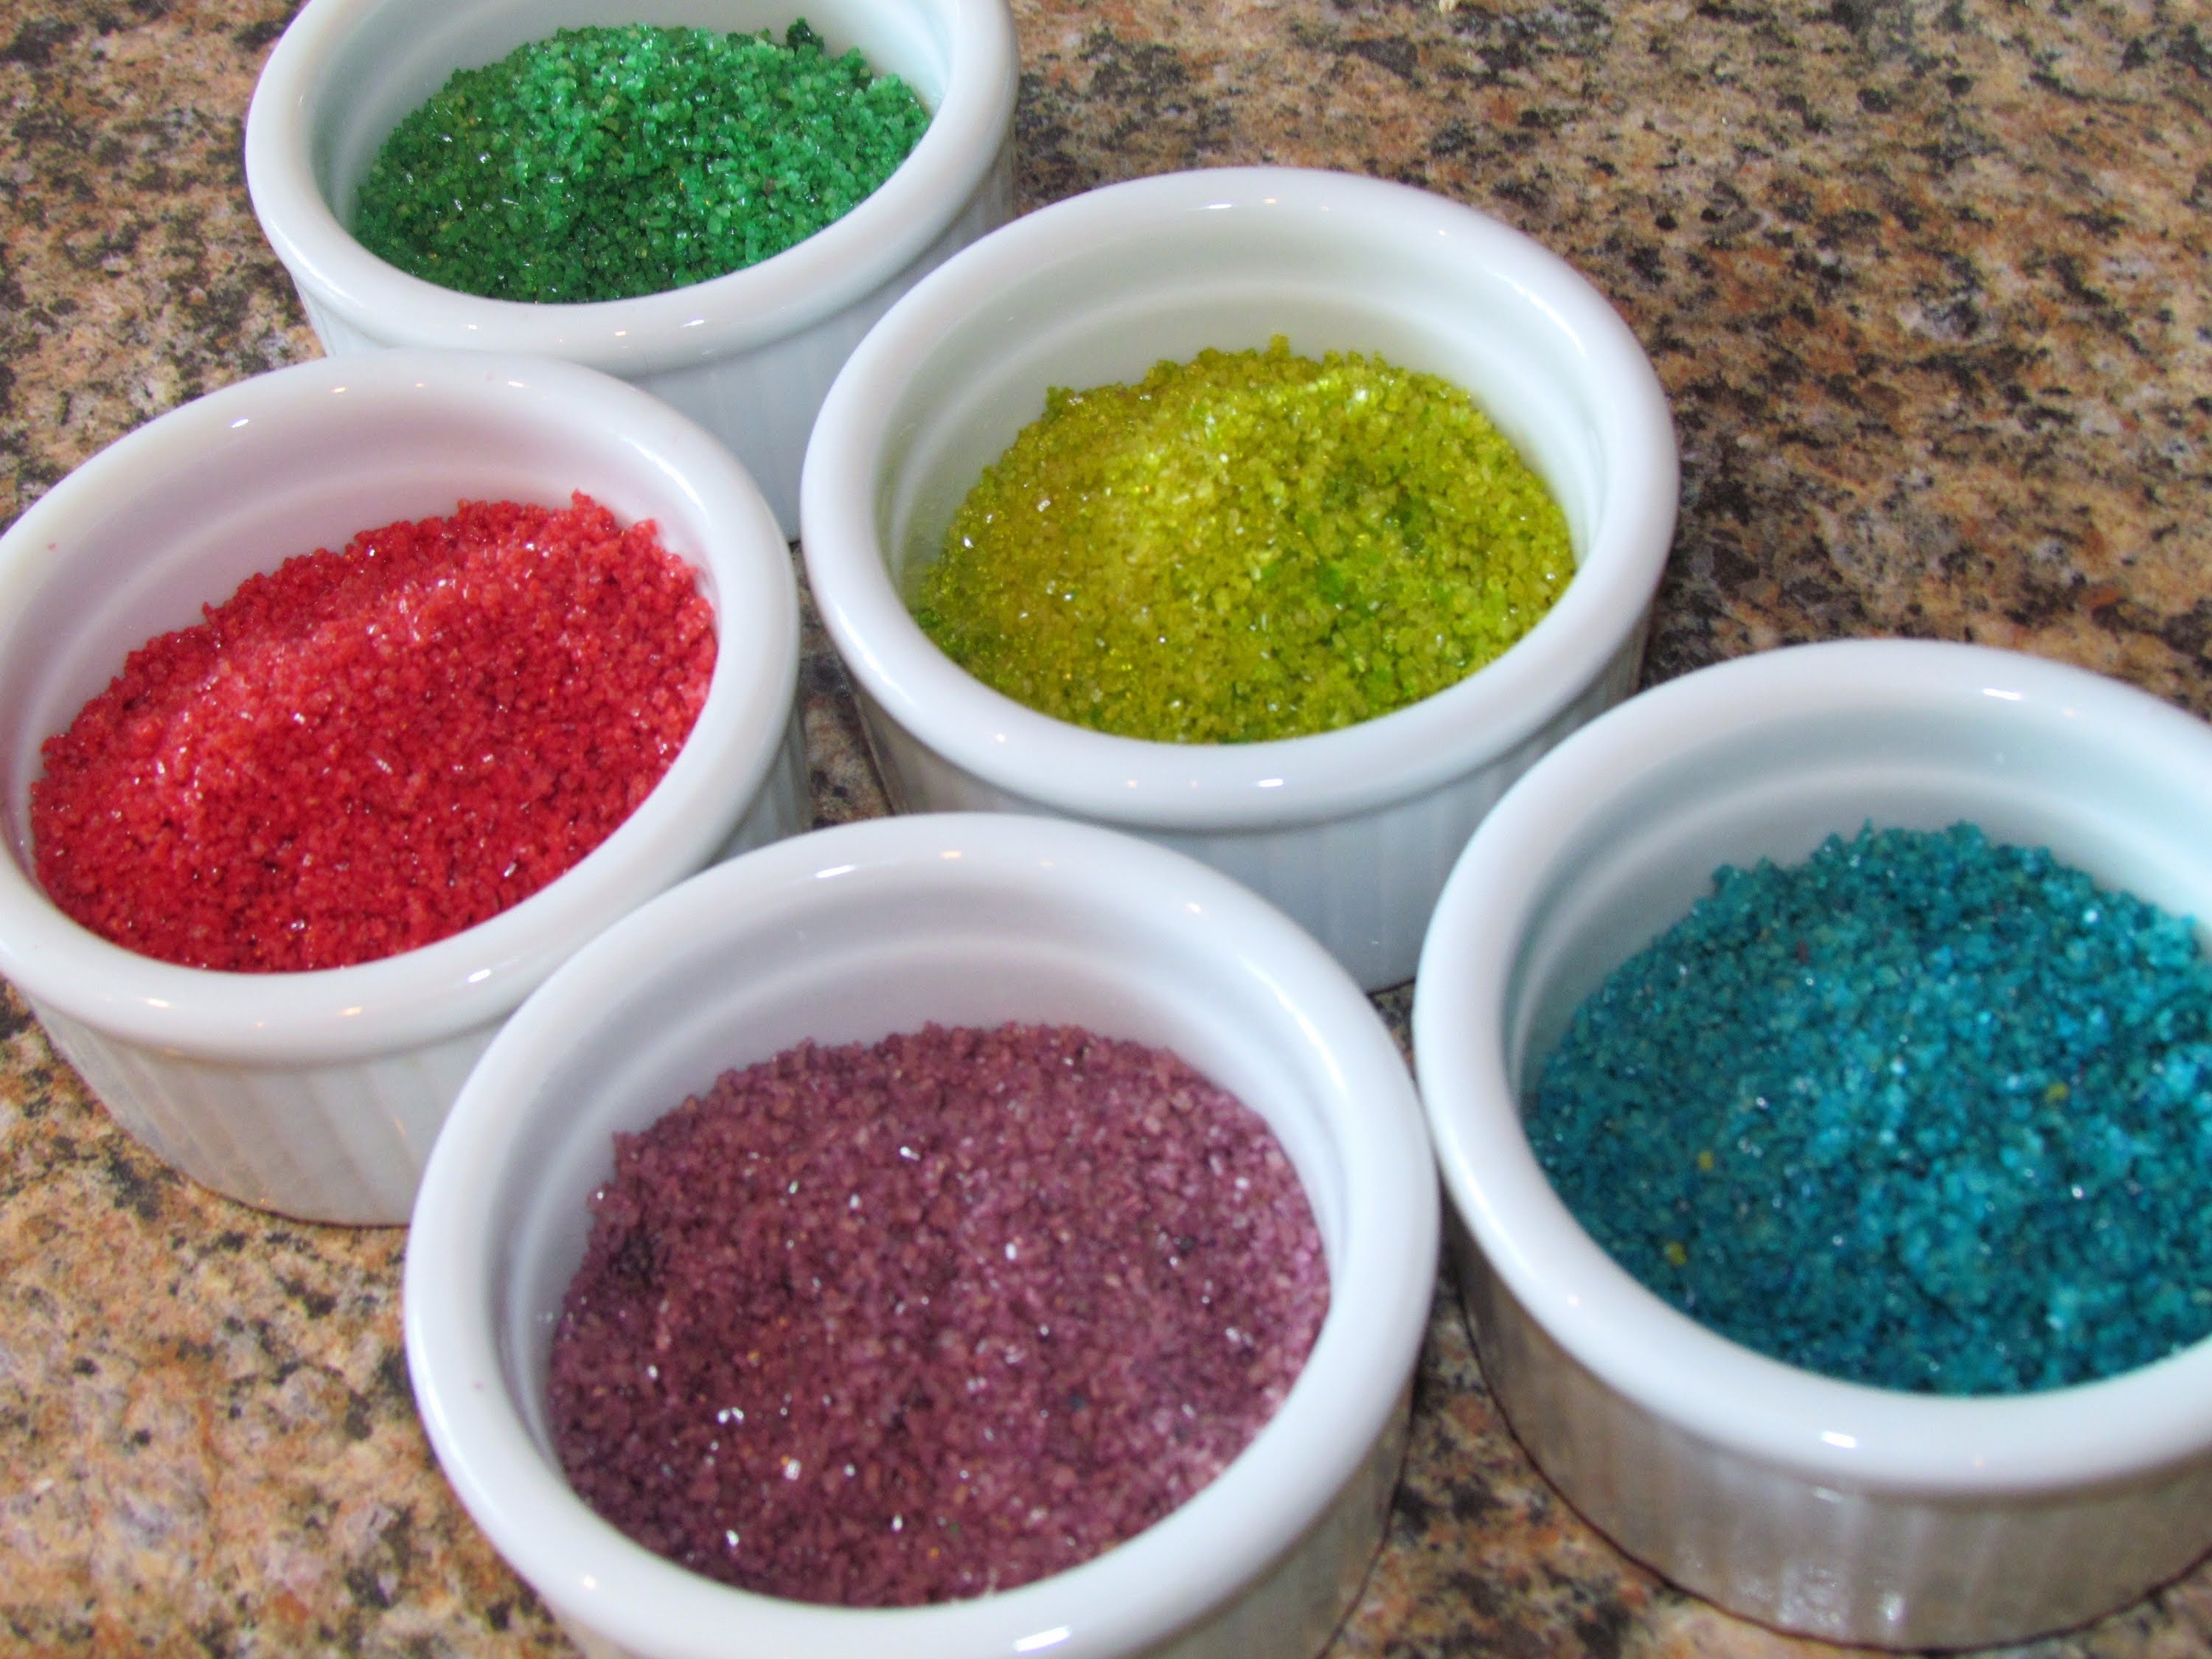 How to Make Edible Glitter with Sugar